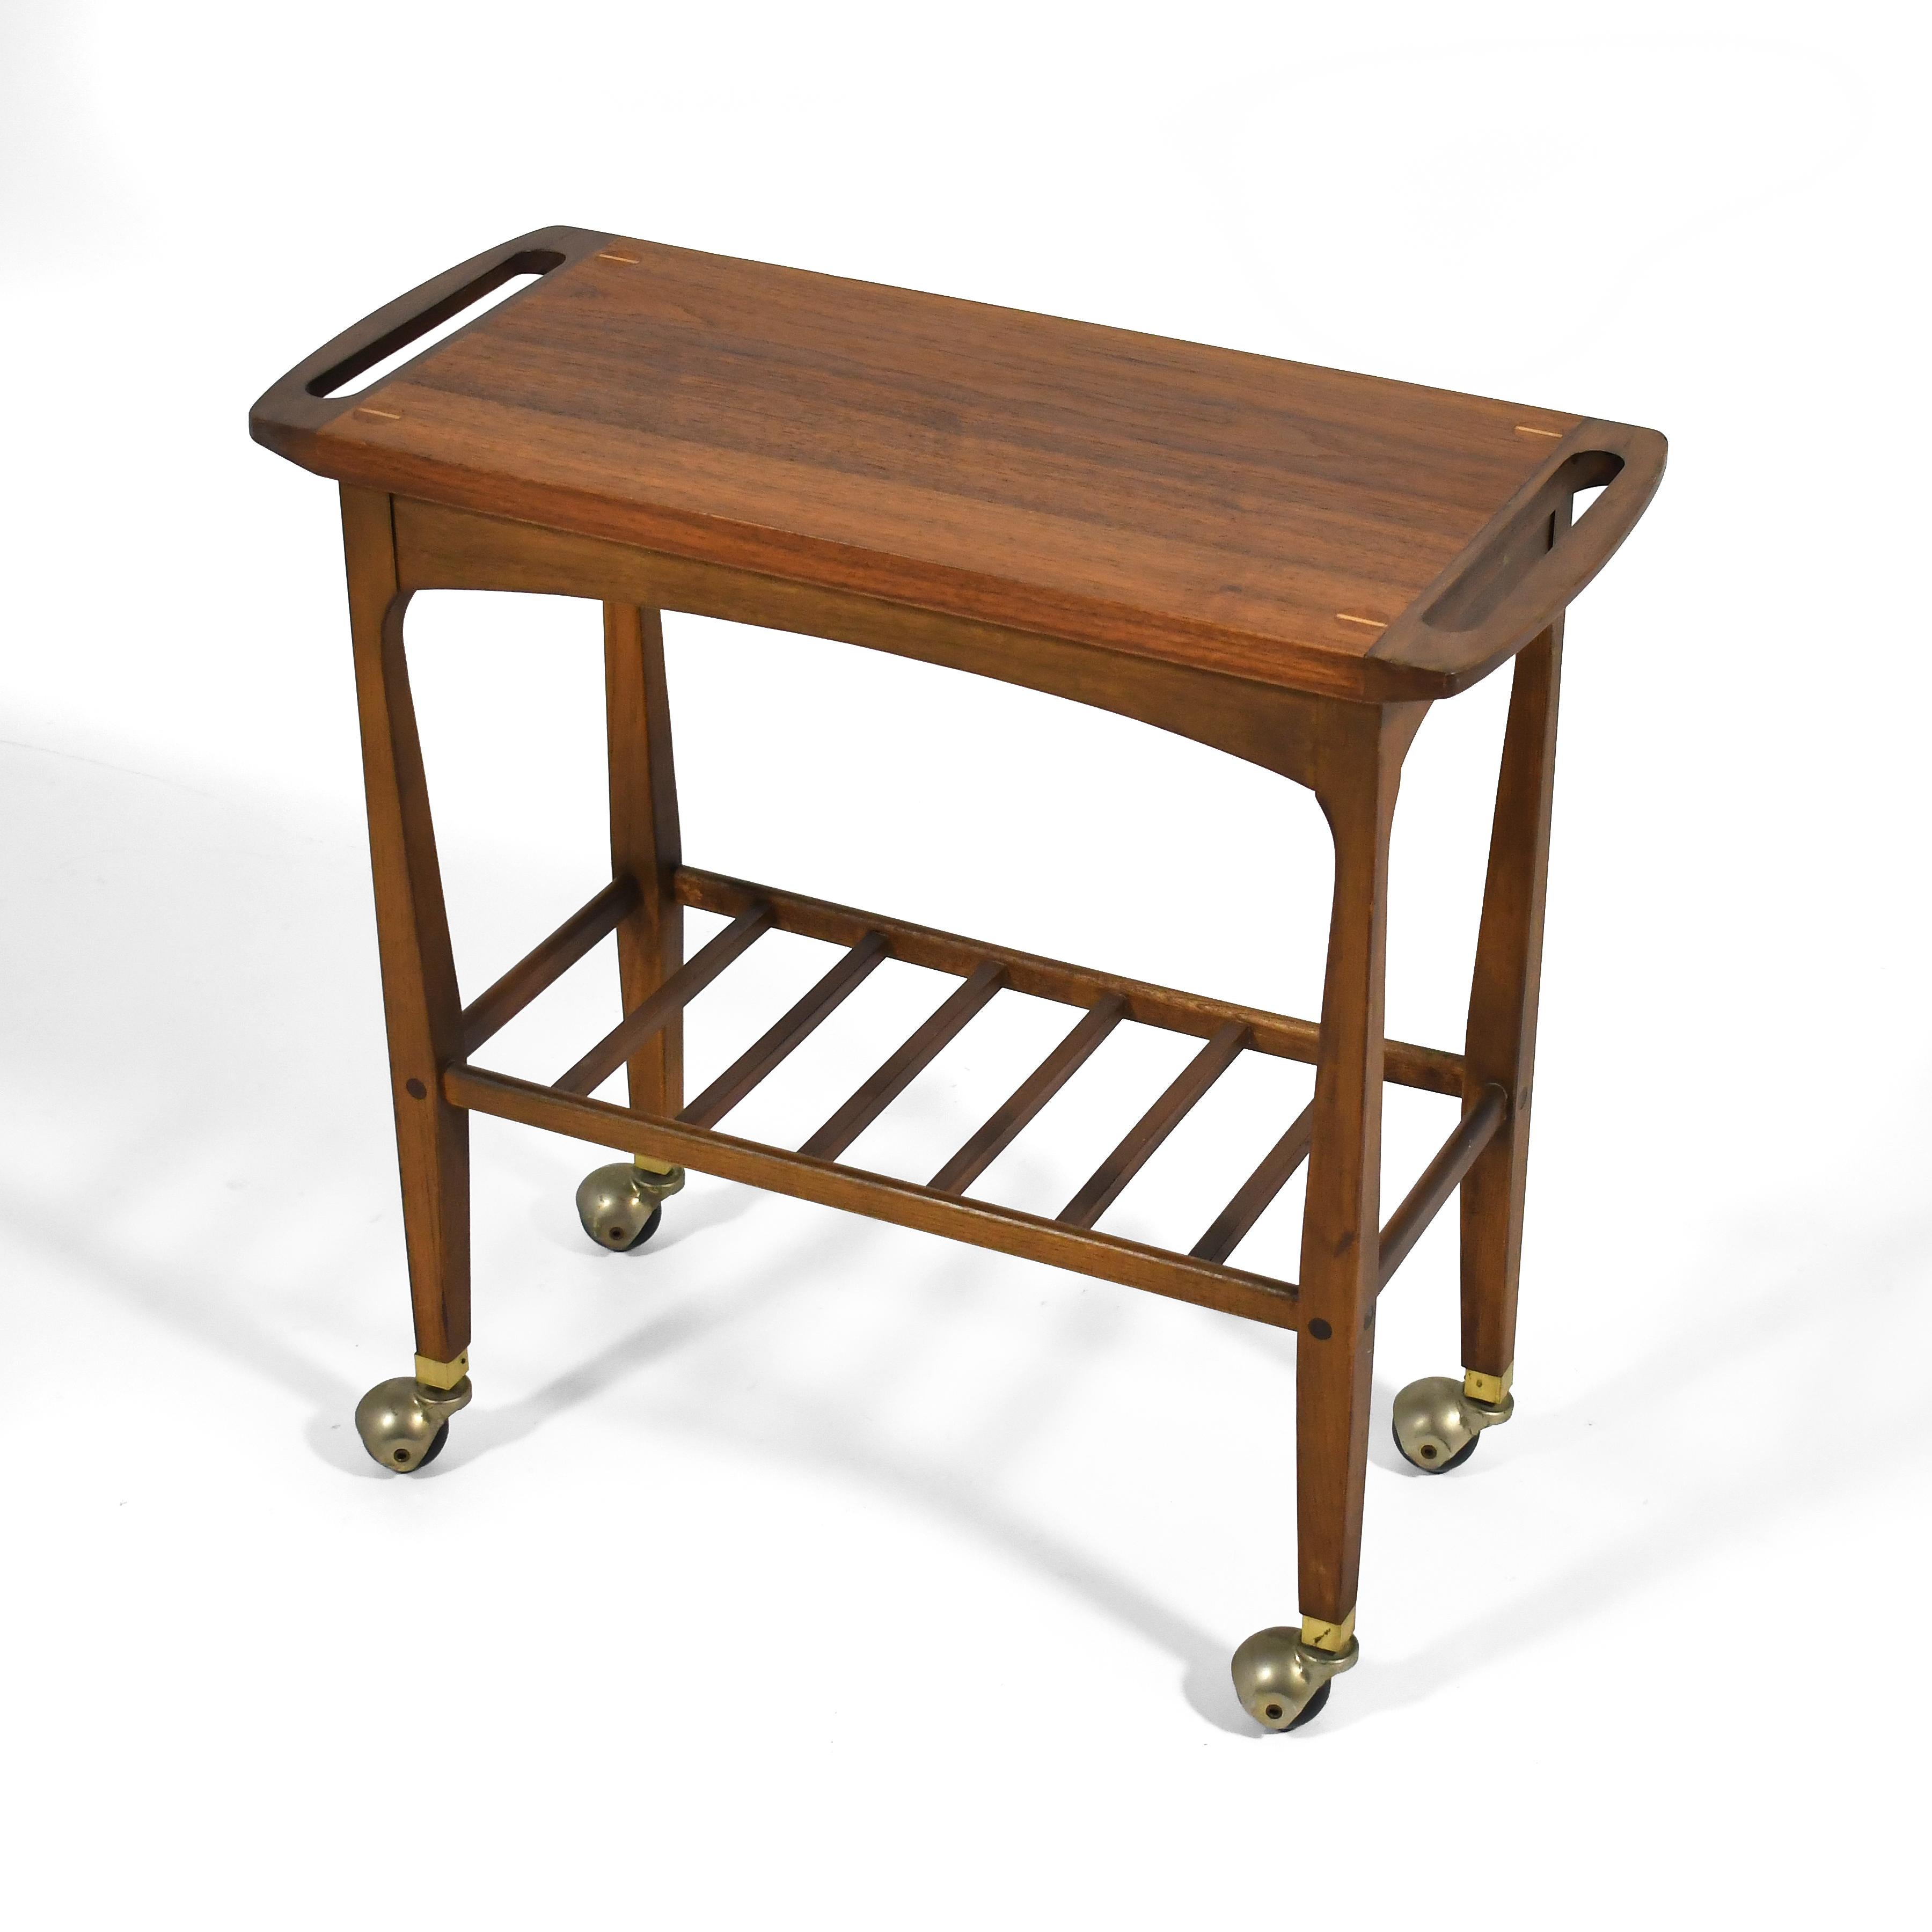 This lovely little Lane serving cart from their 